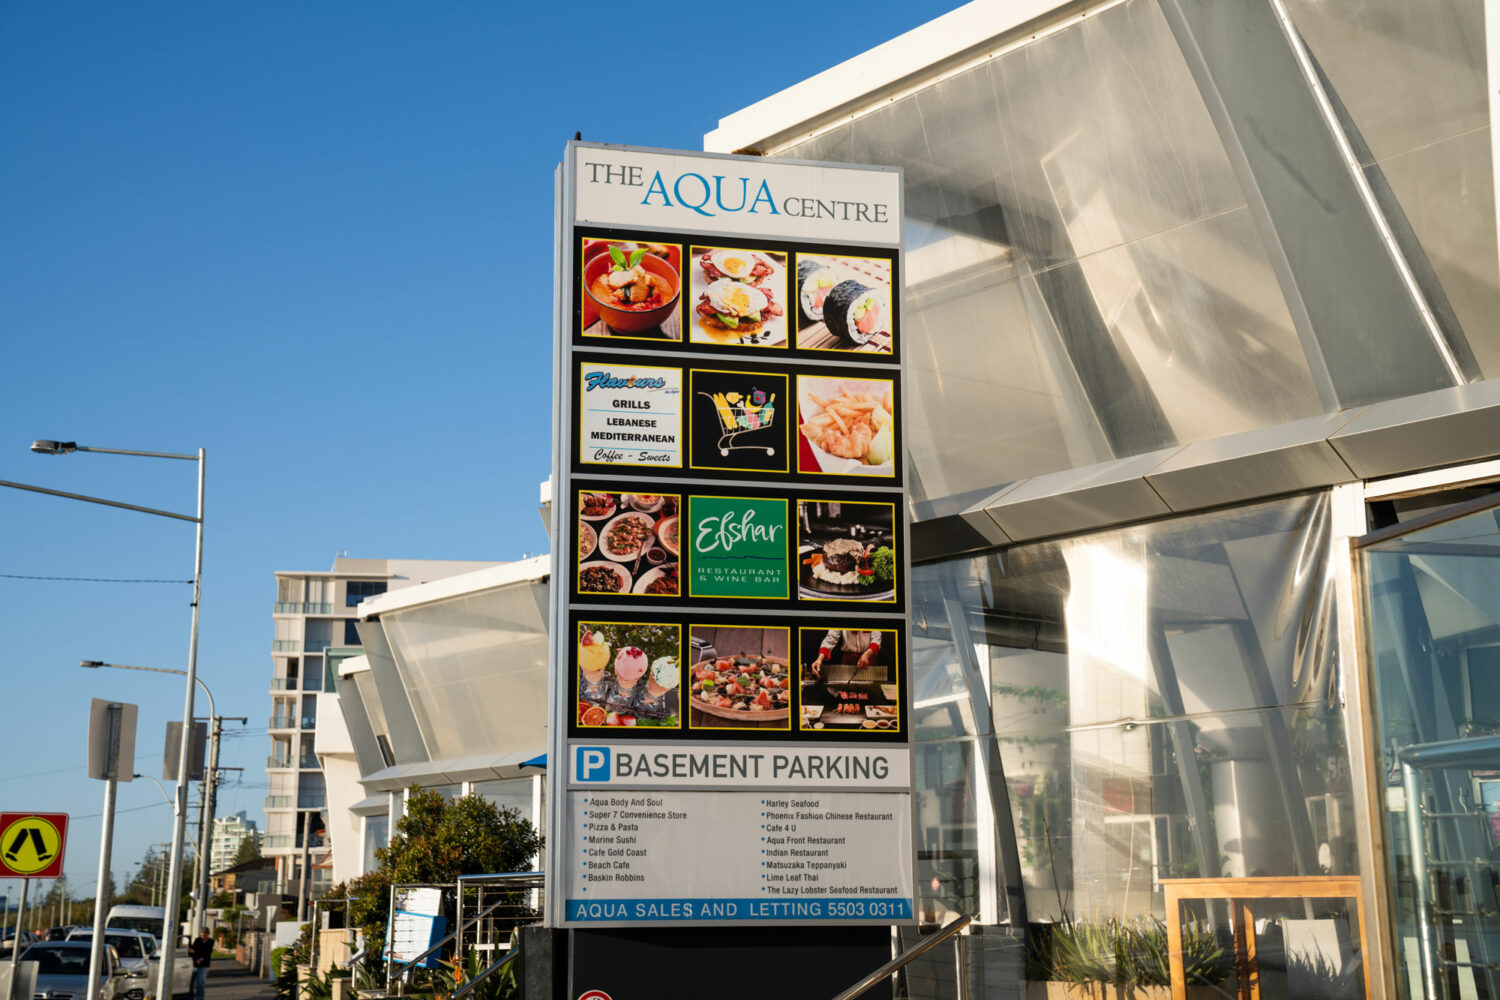 A sign saying "The Aqua Centre" and showing logos and photos of the restaurants and other facilities within the PARK SHORE lifestyle development precinct.